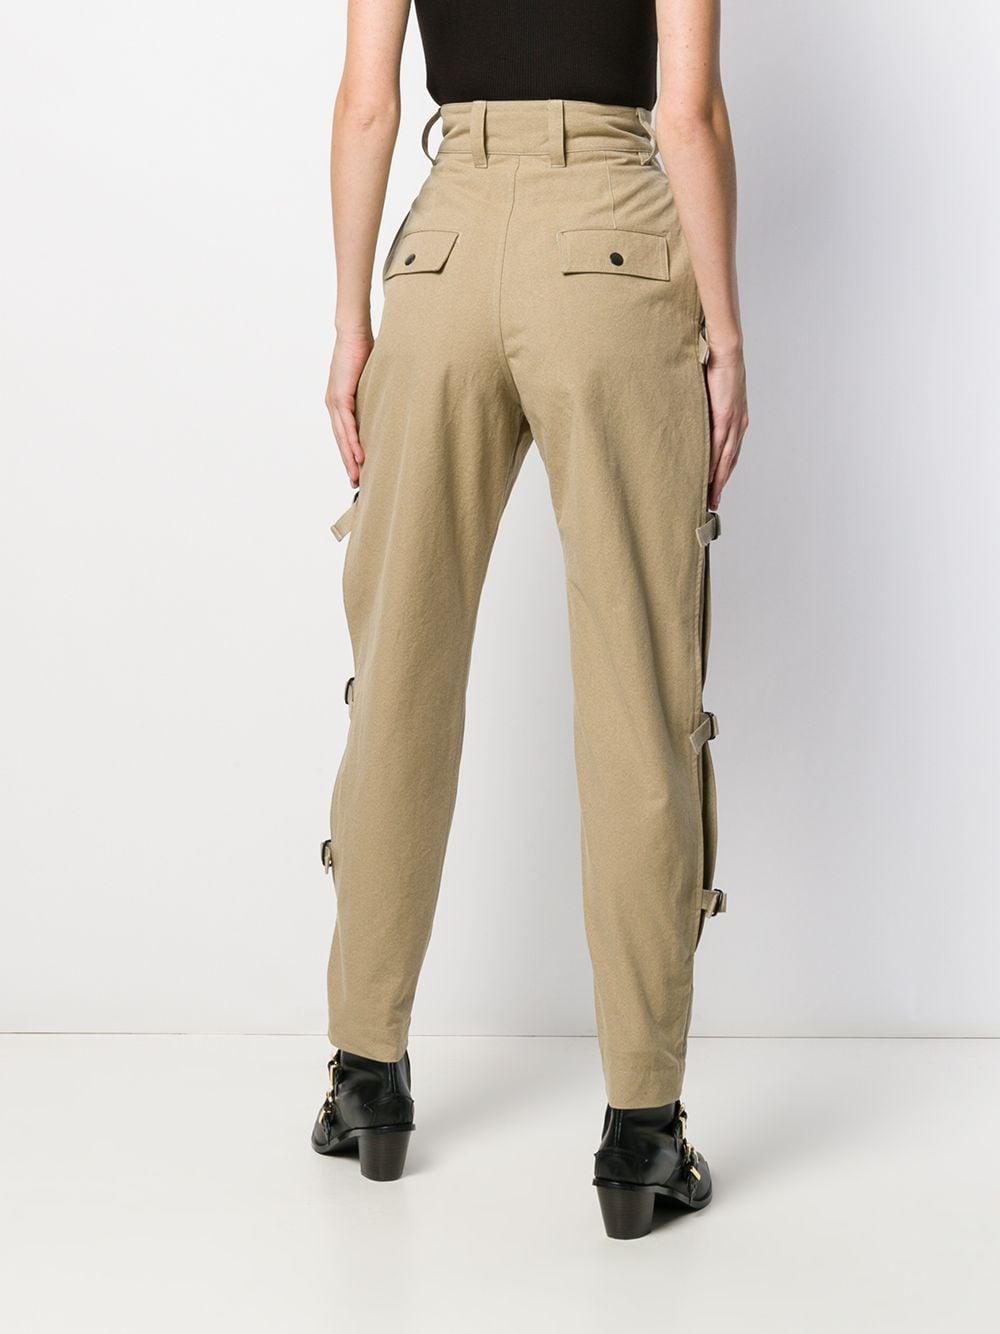 Isabel Marant High Waisted Safari Trousers in Natural | Lyst